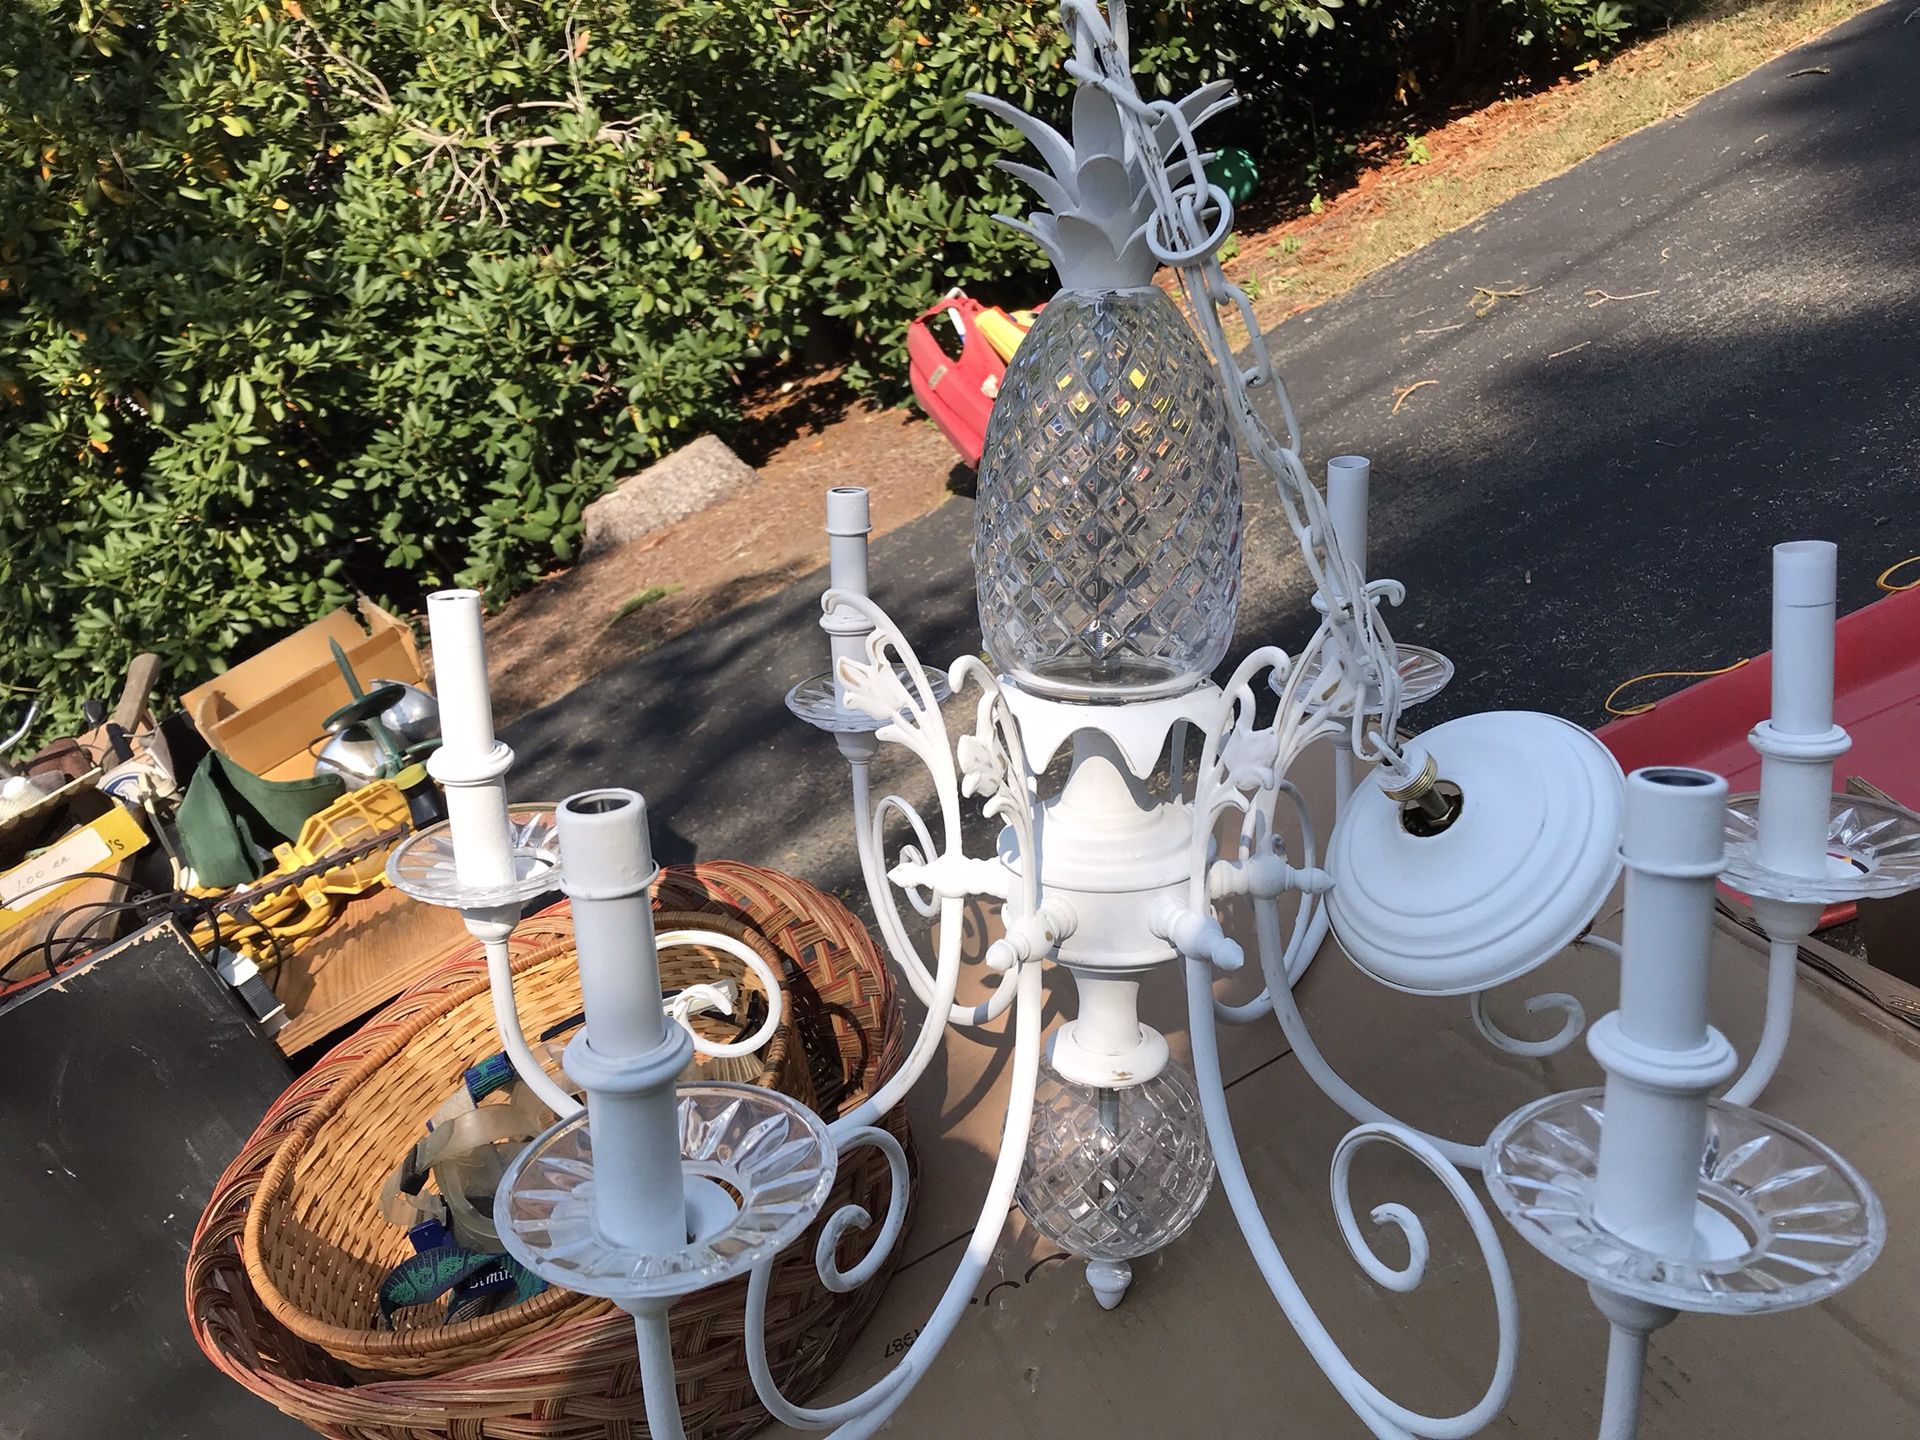 Chandelier with pineapple